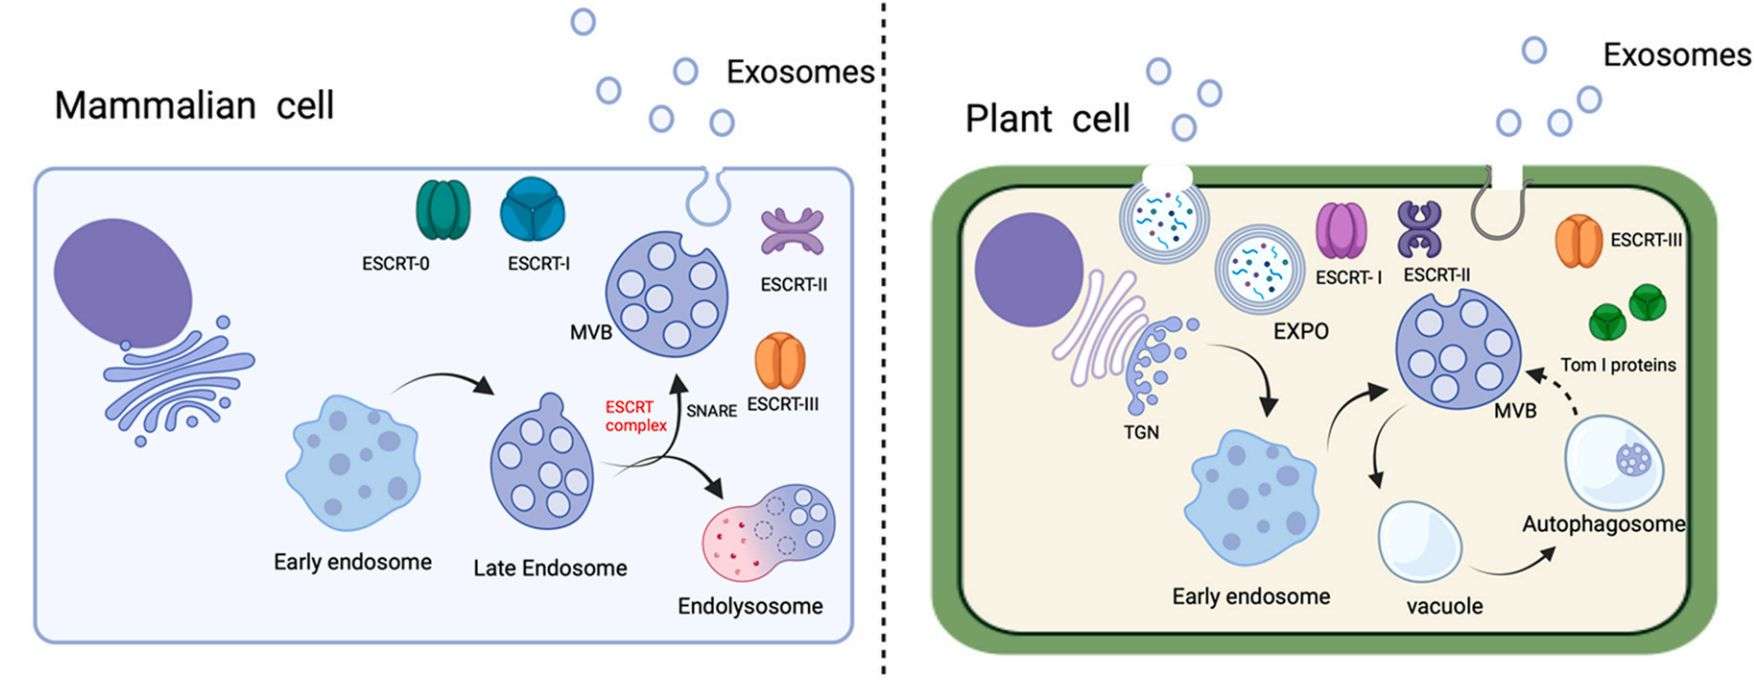 Figure 2. Exosomes in mammals and fruits.